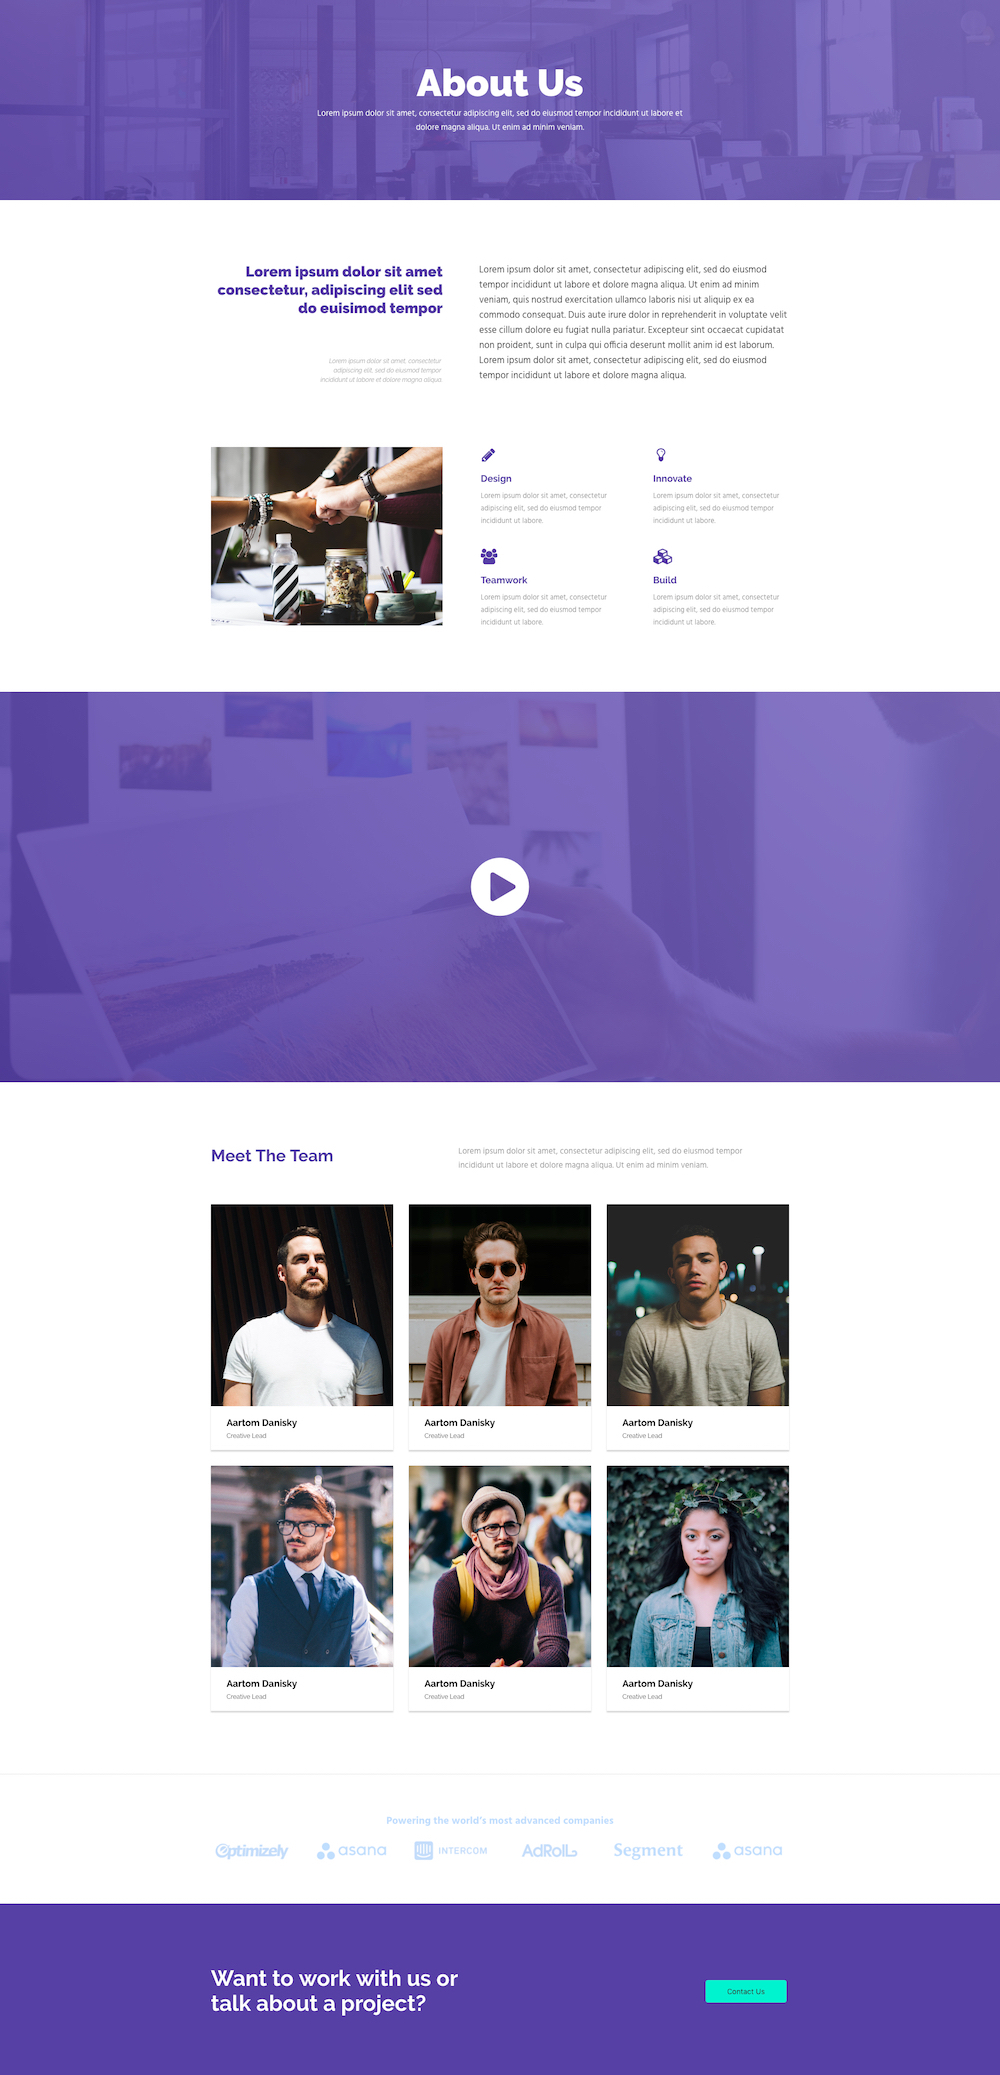 Introducing Digital Agency layout bundle for SP Page Builder Pro